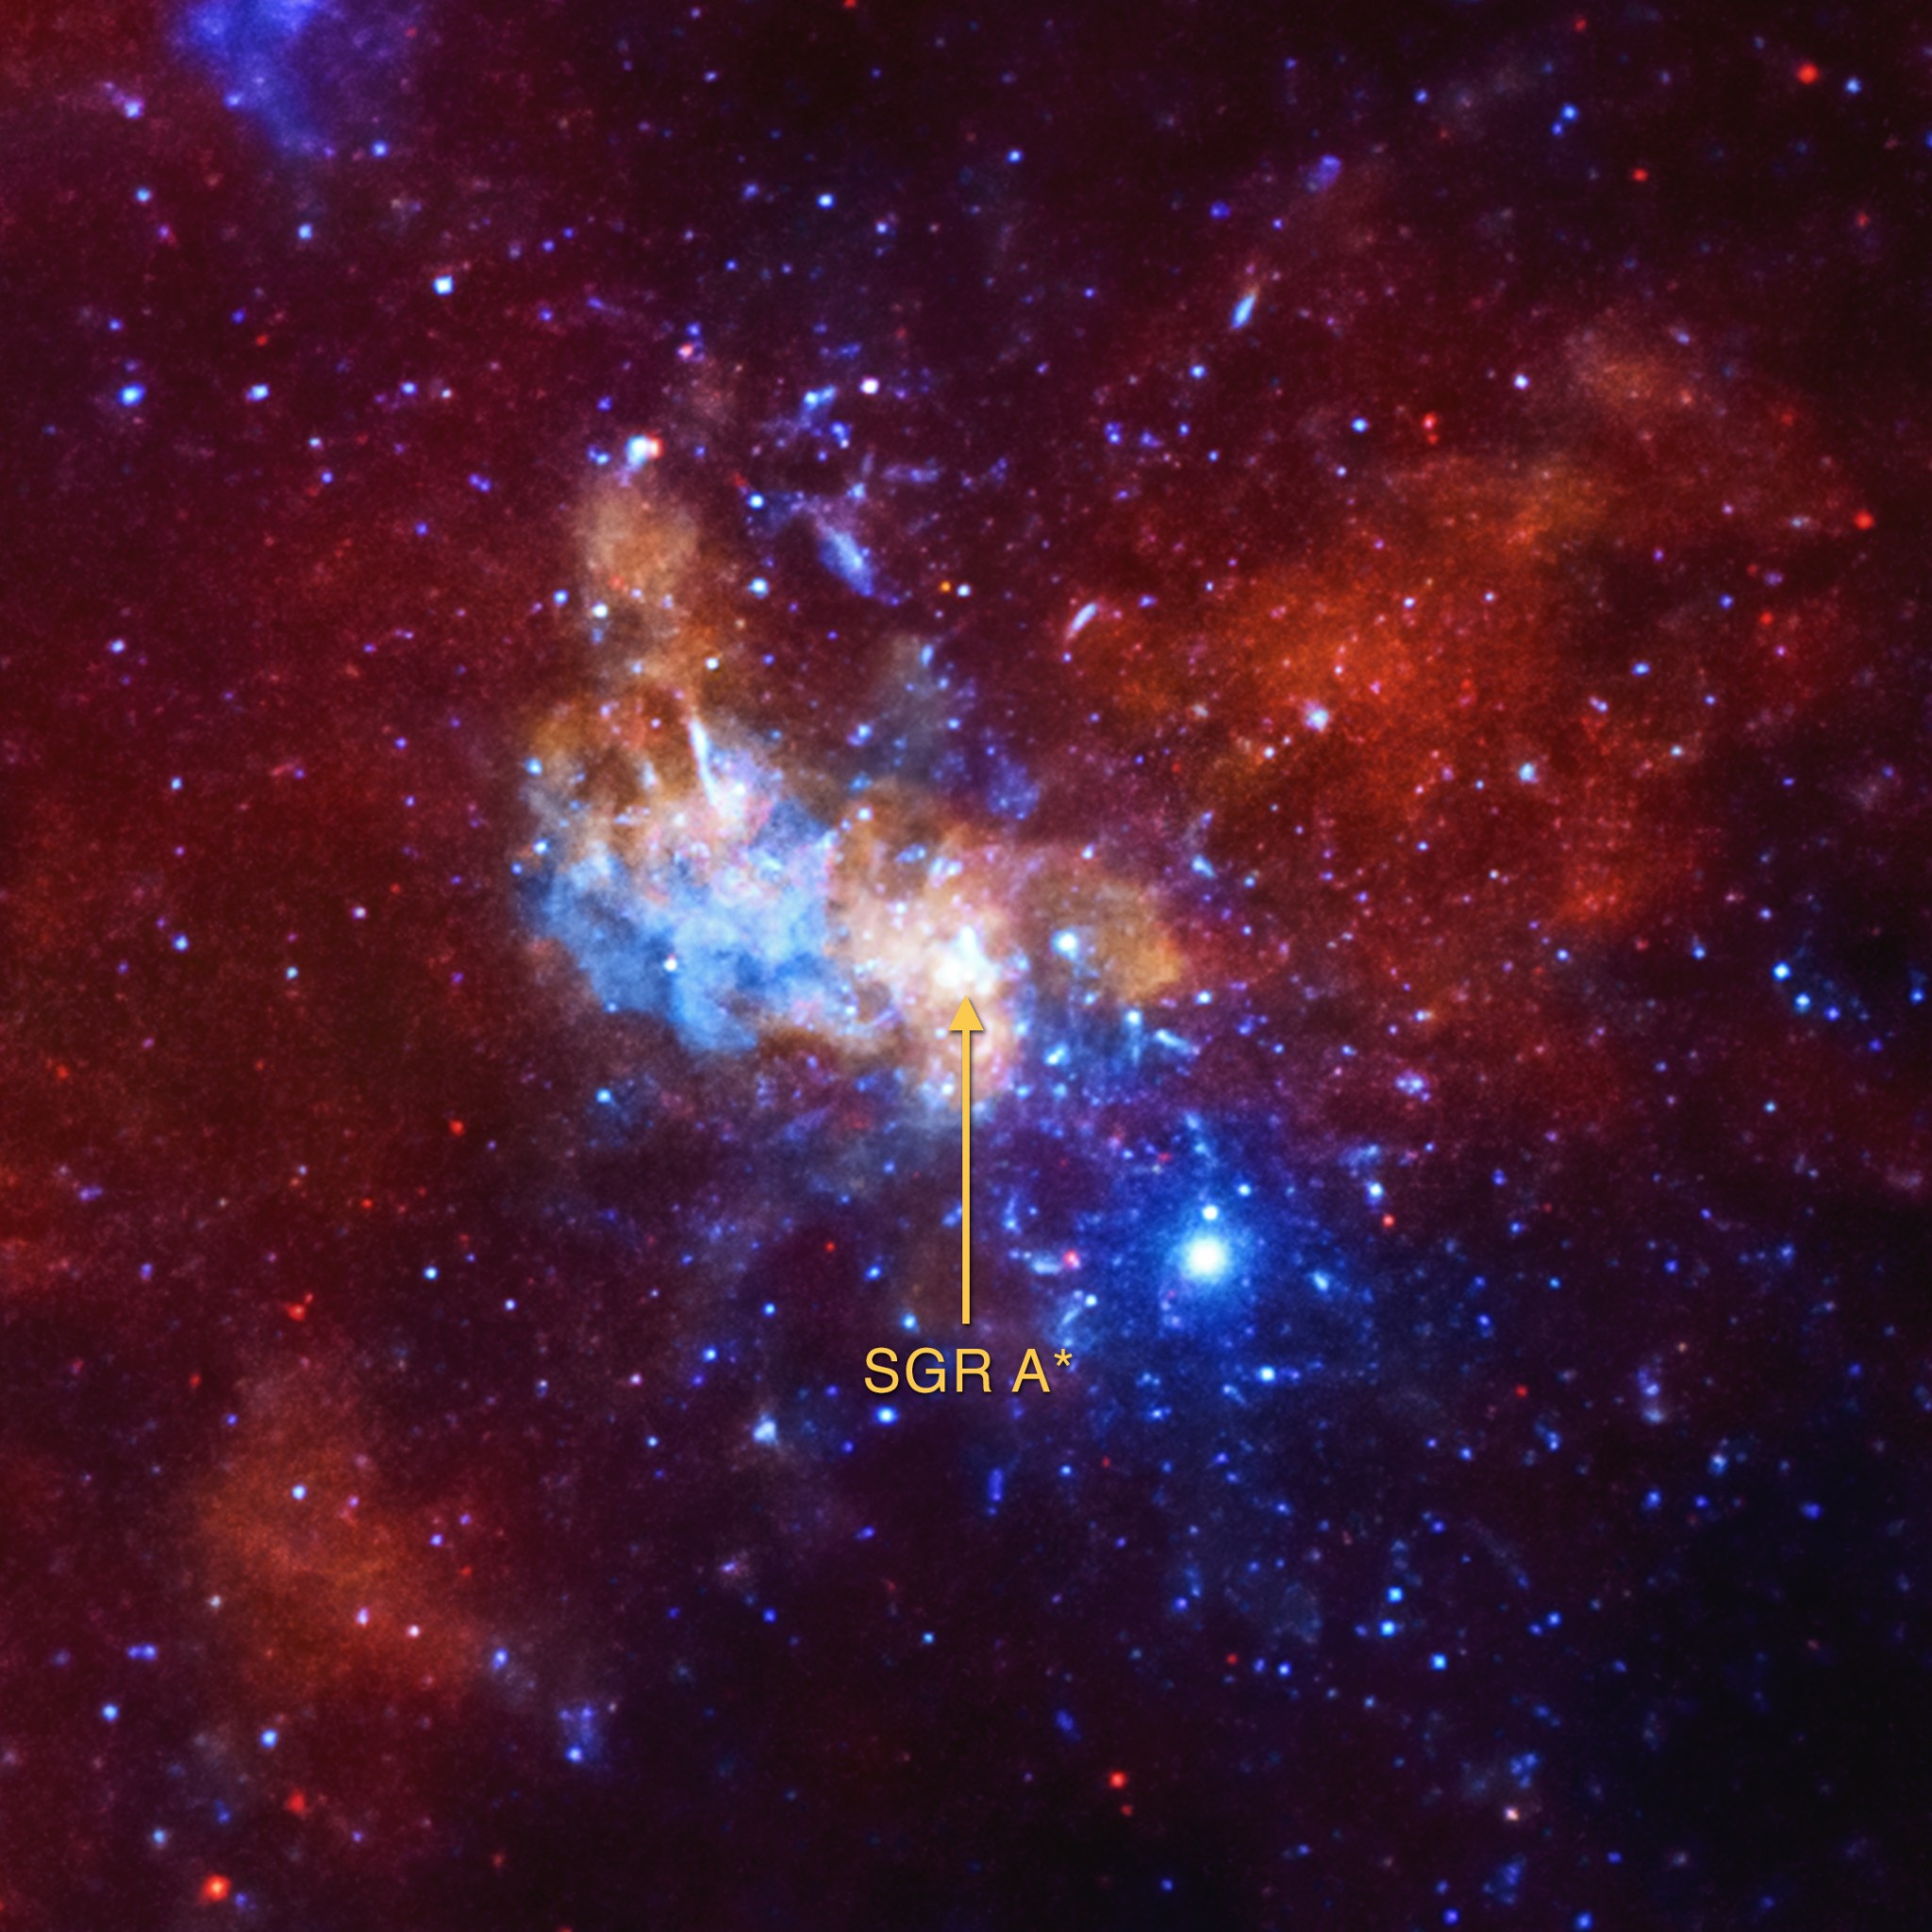 The supermassive black hole at the center of the Milky Way may be producing tiny particles, called neutrinos, that have virtually no mass and carry no electric charge. This Chandra image shows the region around the black hole, known as Sagittarius A*, in low, medium, and high-energy X-rays (red, green, and blue respectively.) Scientists have found a connection to outbursts generated by the black hole and seen by Chandra and other X-ray telescopes with the detection of high-energy neutrinos in an observatory under the South Pole.